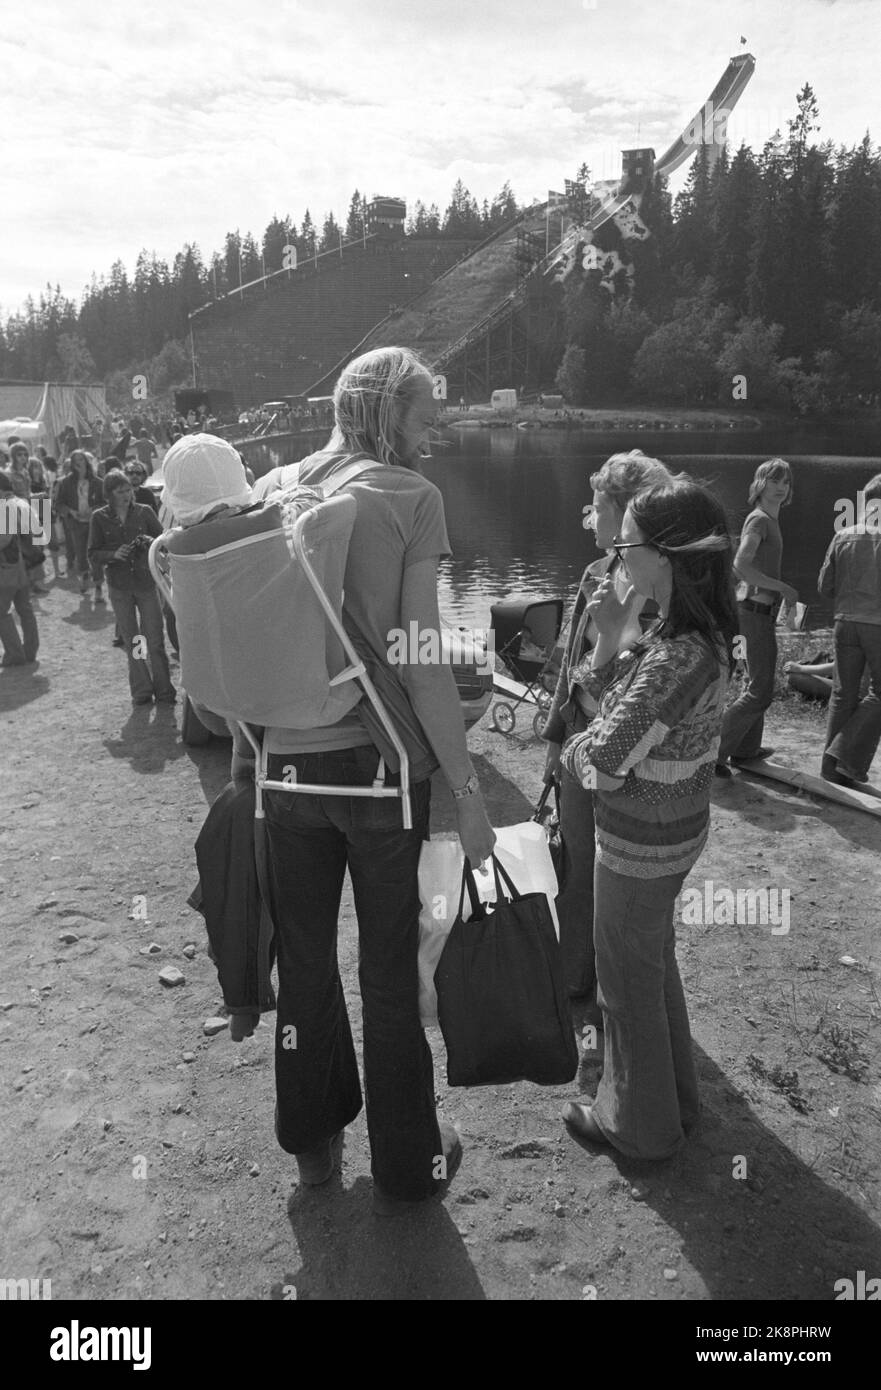 Oslo June 17, 1973. Rock concert in Holmenkollen, the Ragnarock event under the auspices of Centralfilm A/S was a great success. The event took place from 1300 until midnight. The first group out was the Bergen Group Saft in interaction with Hardangerfler Sigbjørn Bernhoft Osa. The tickets cost NOK 20 and a movie from the event is scheduled to be shown 3-4 months after the concert. Children in carrier. Photo: Current / NTB Stock Photo